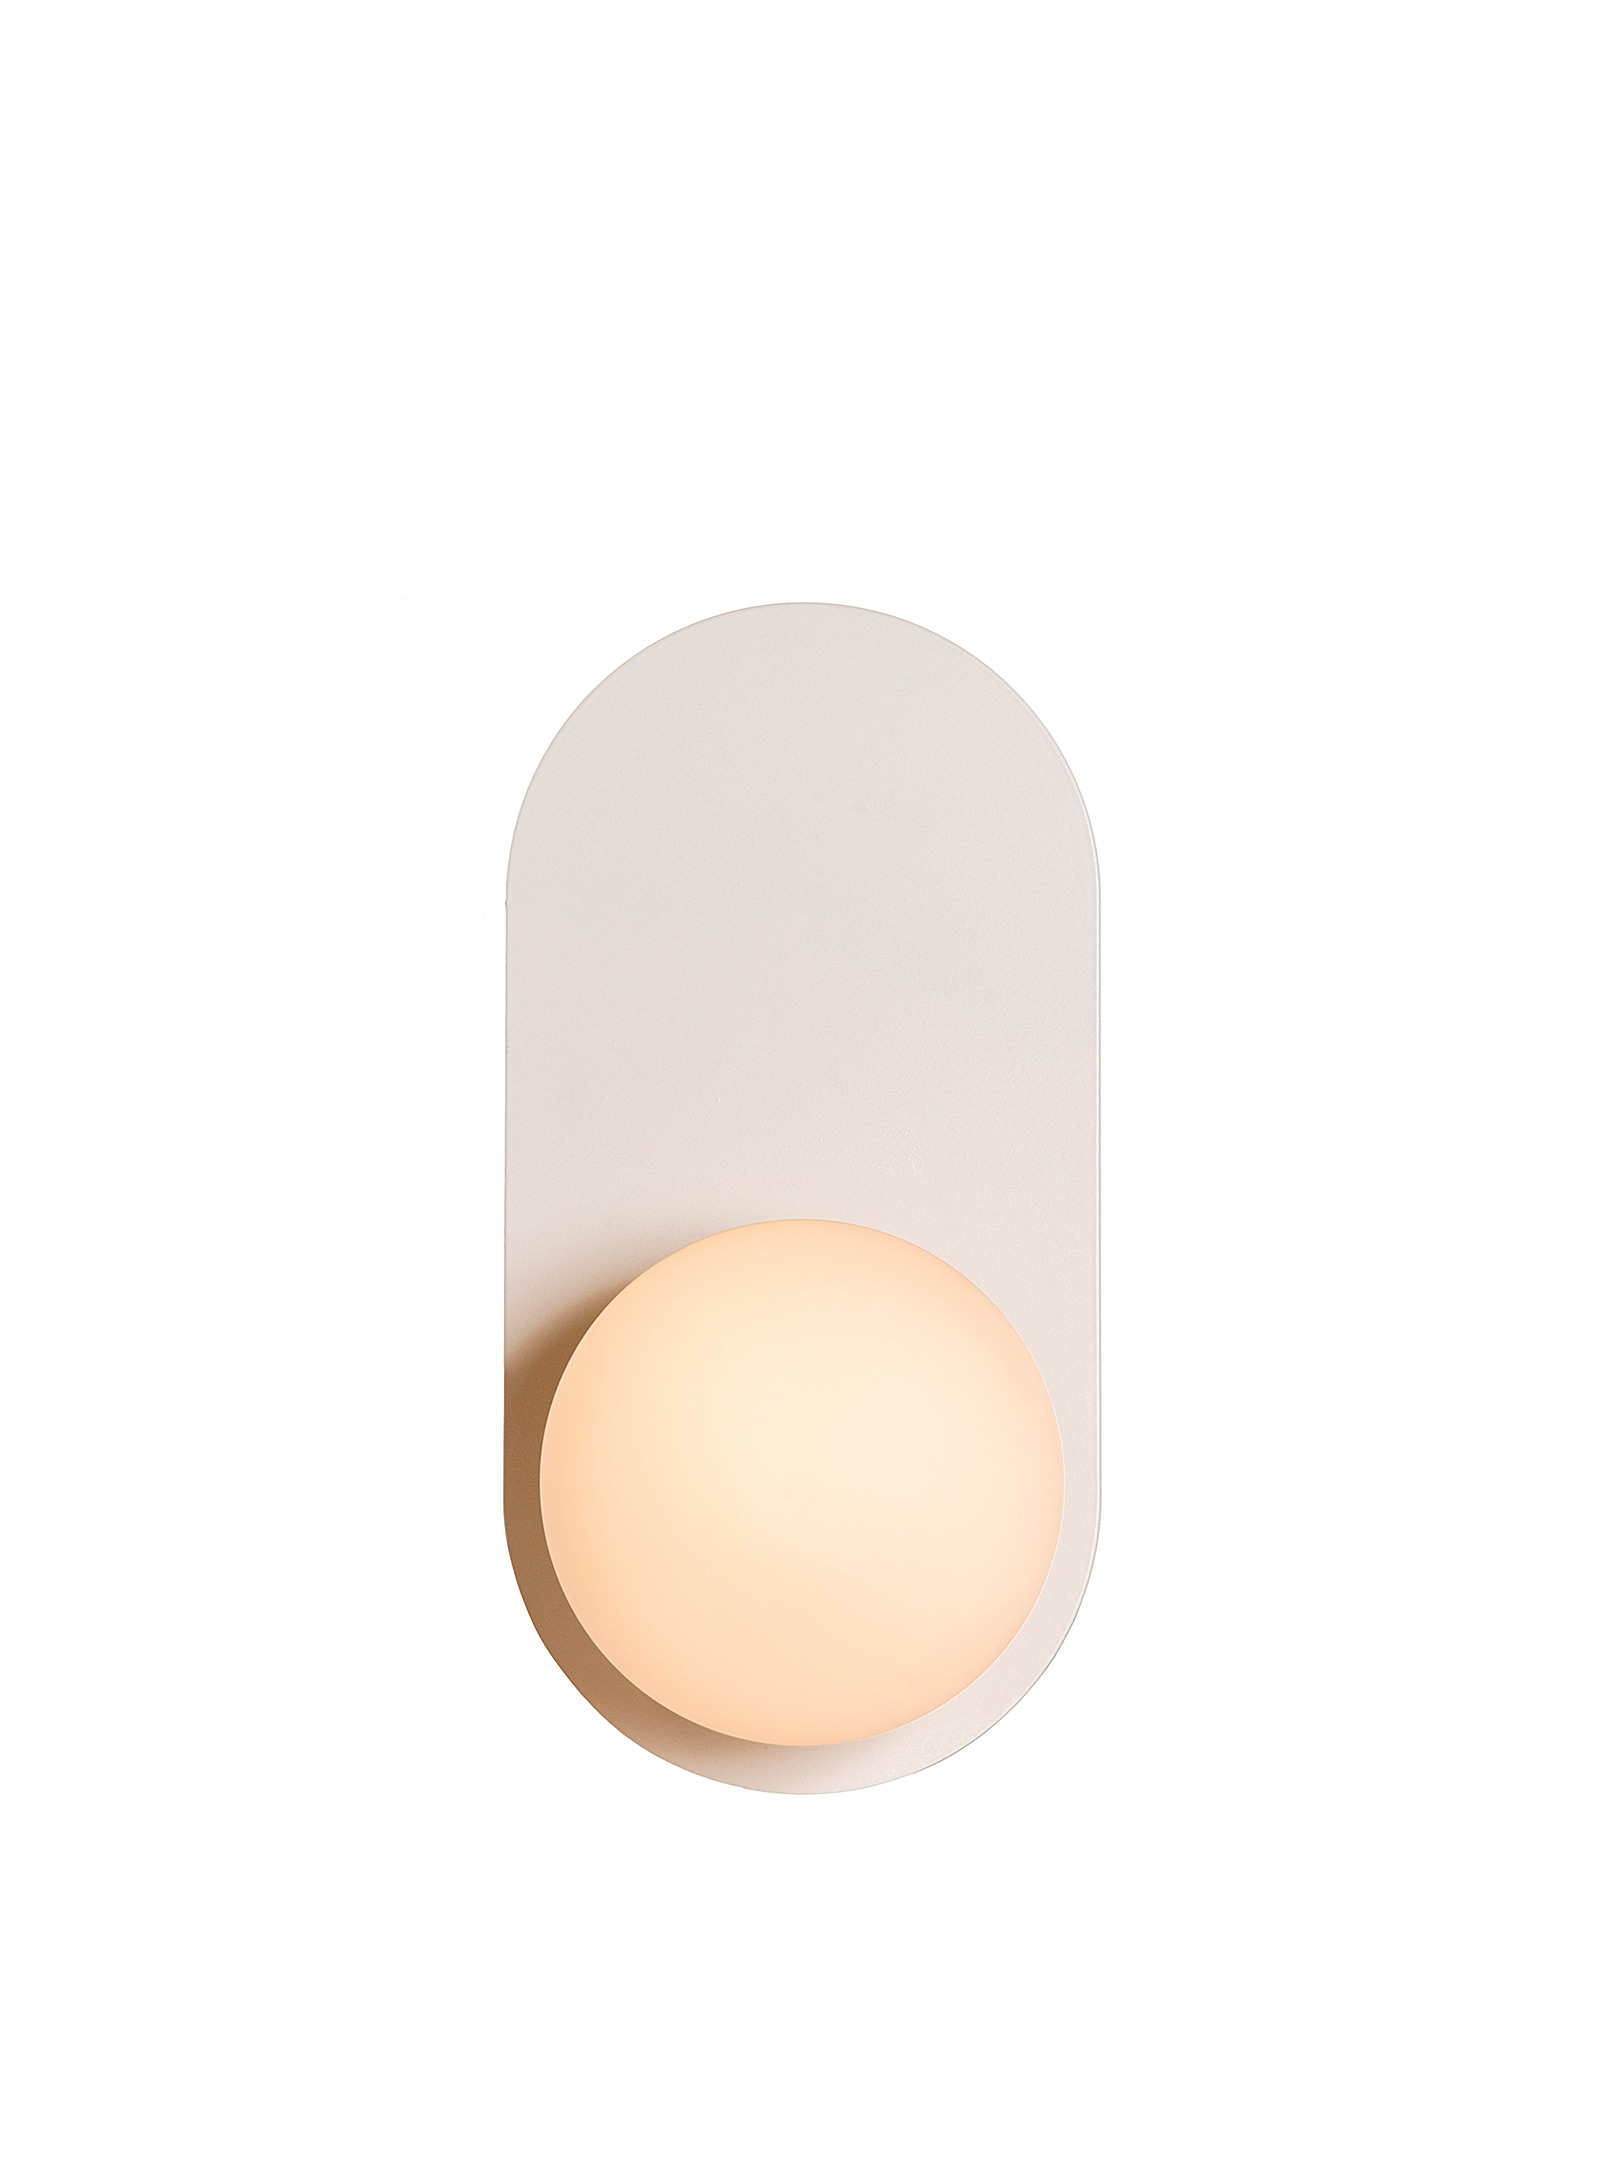 Luminaire Authentik Arch Wall Sconce In Cream Beige